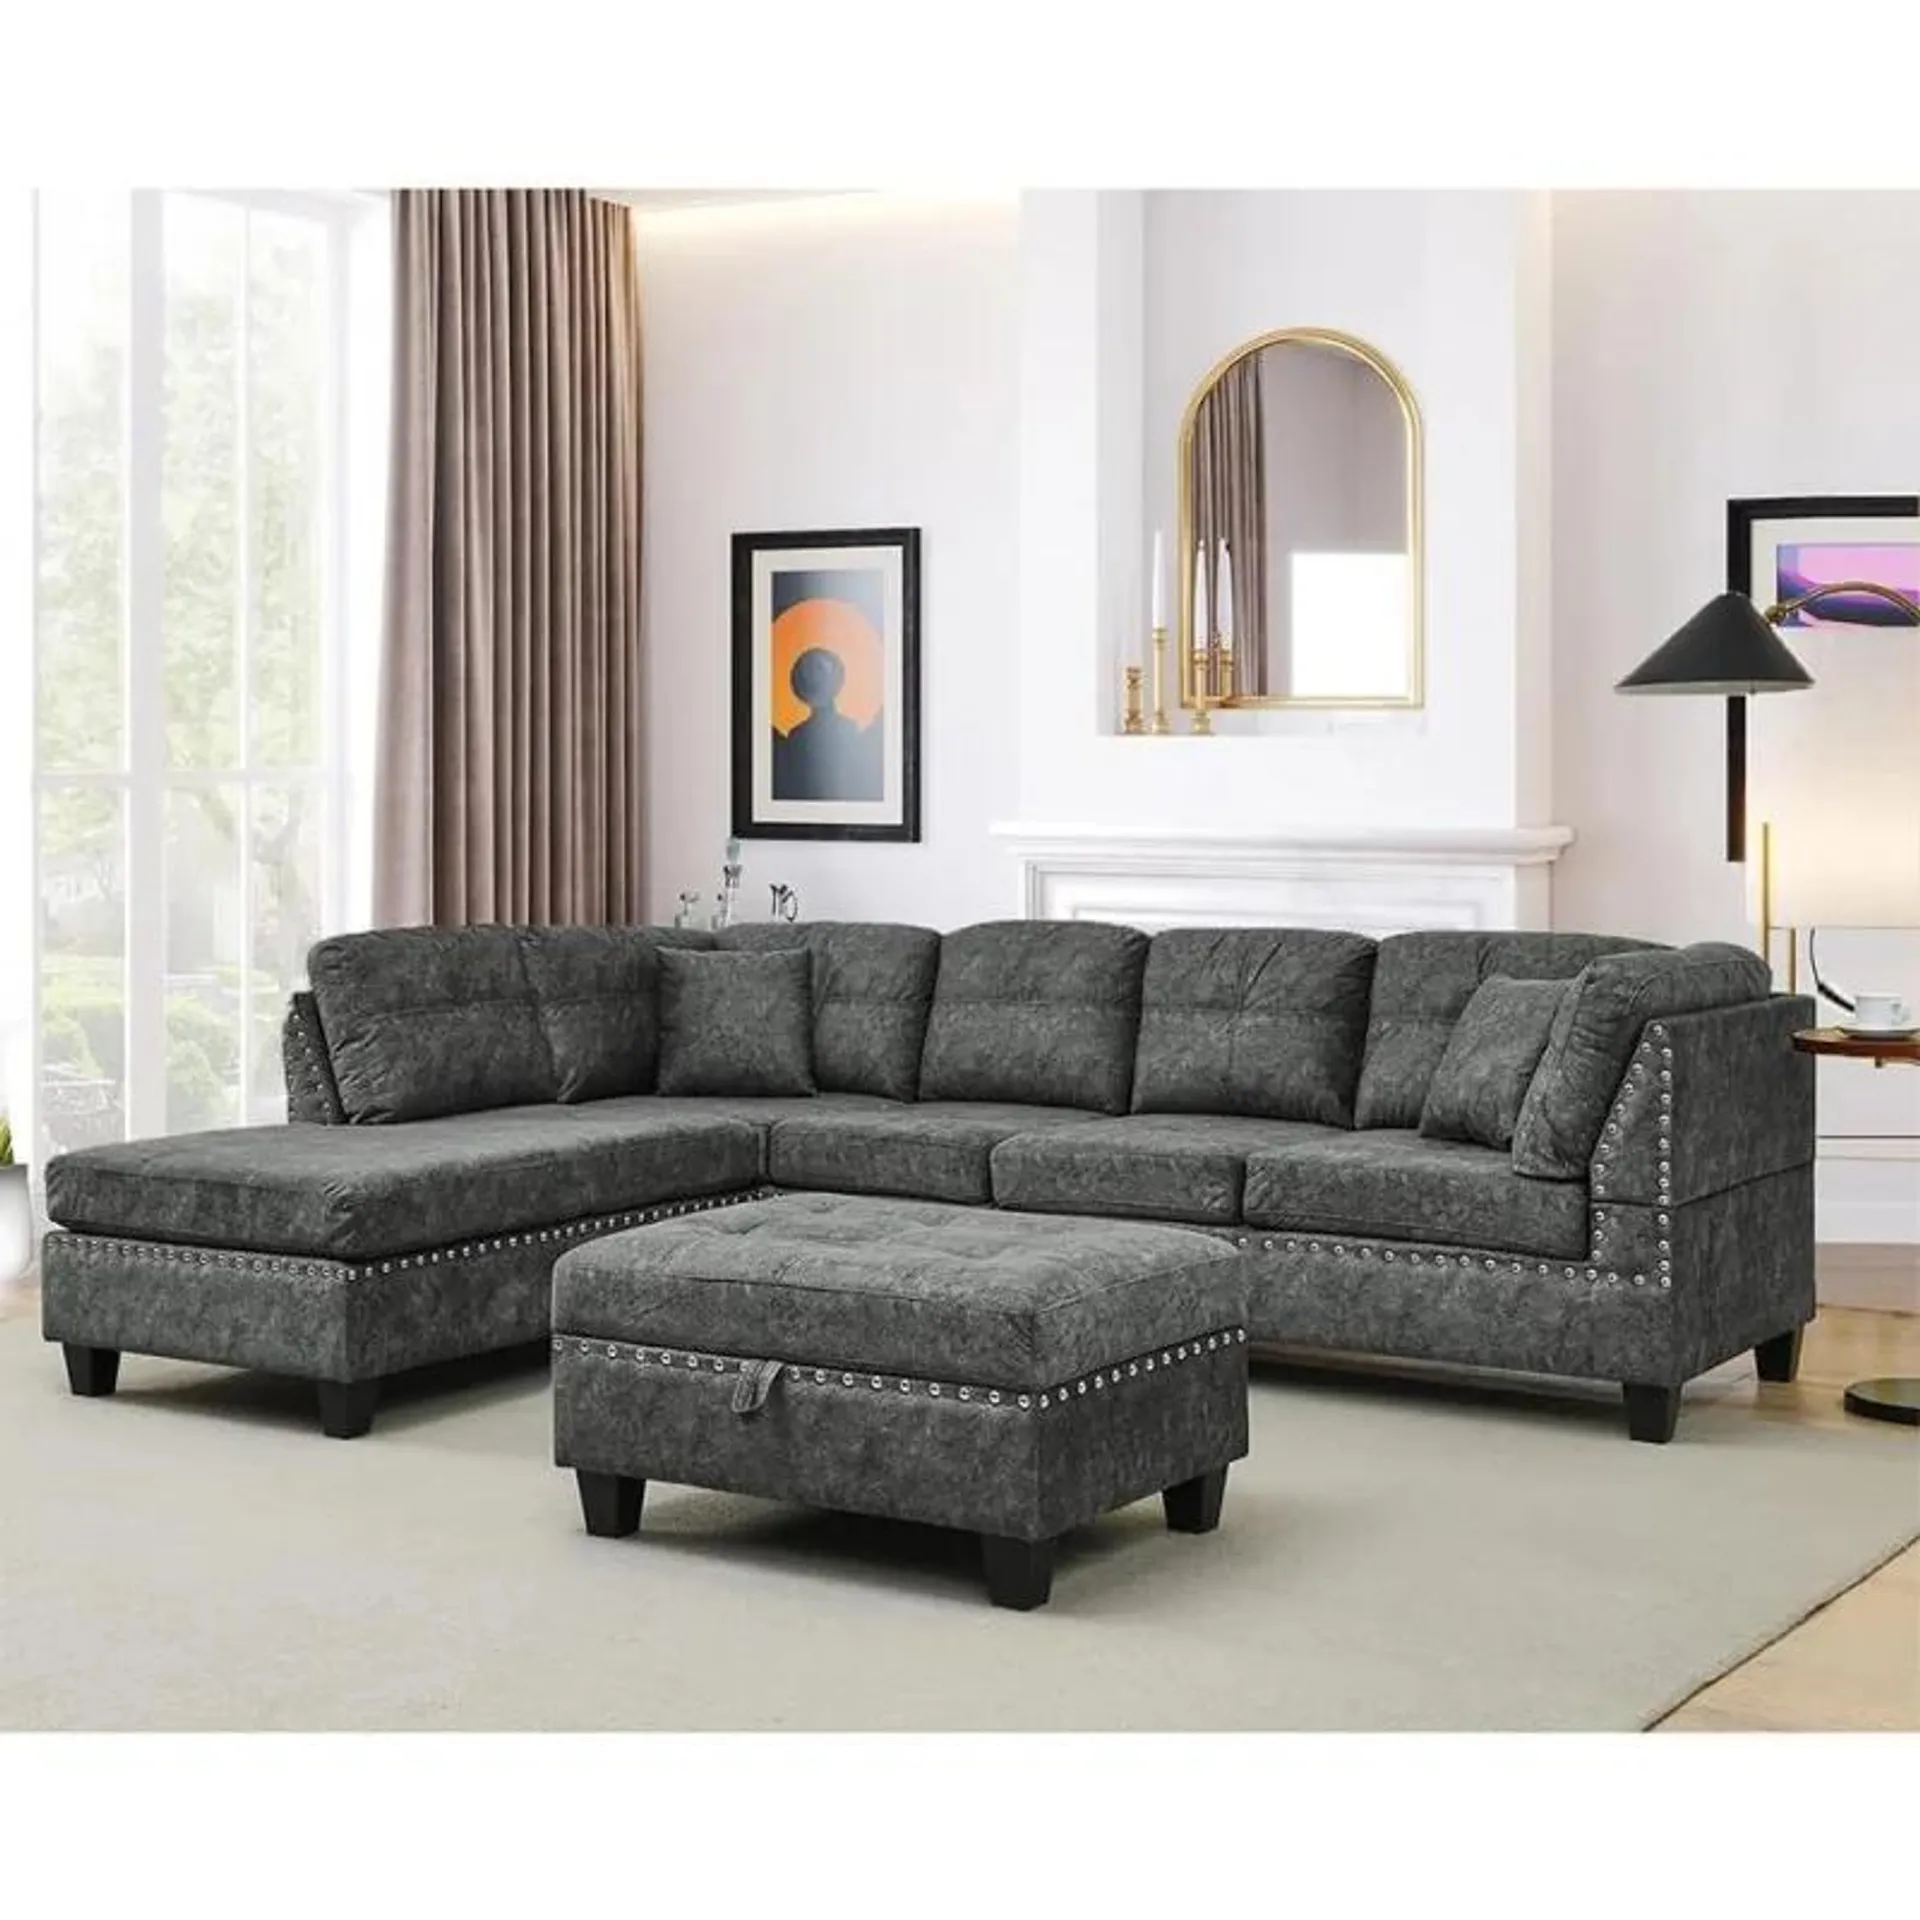 Living Room Furniture Sets,Sectional Sofa with Storage Ottoman,L-Shaped 2 Pillows&Extra Wide Reversible Chaise,Upholstered C